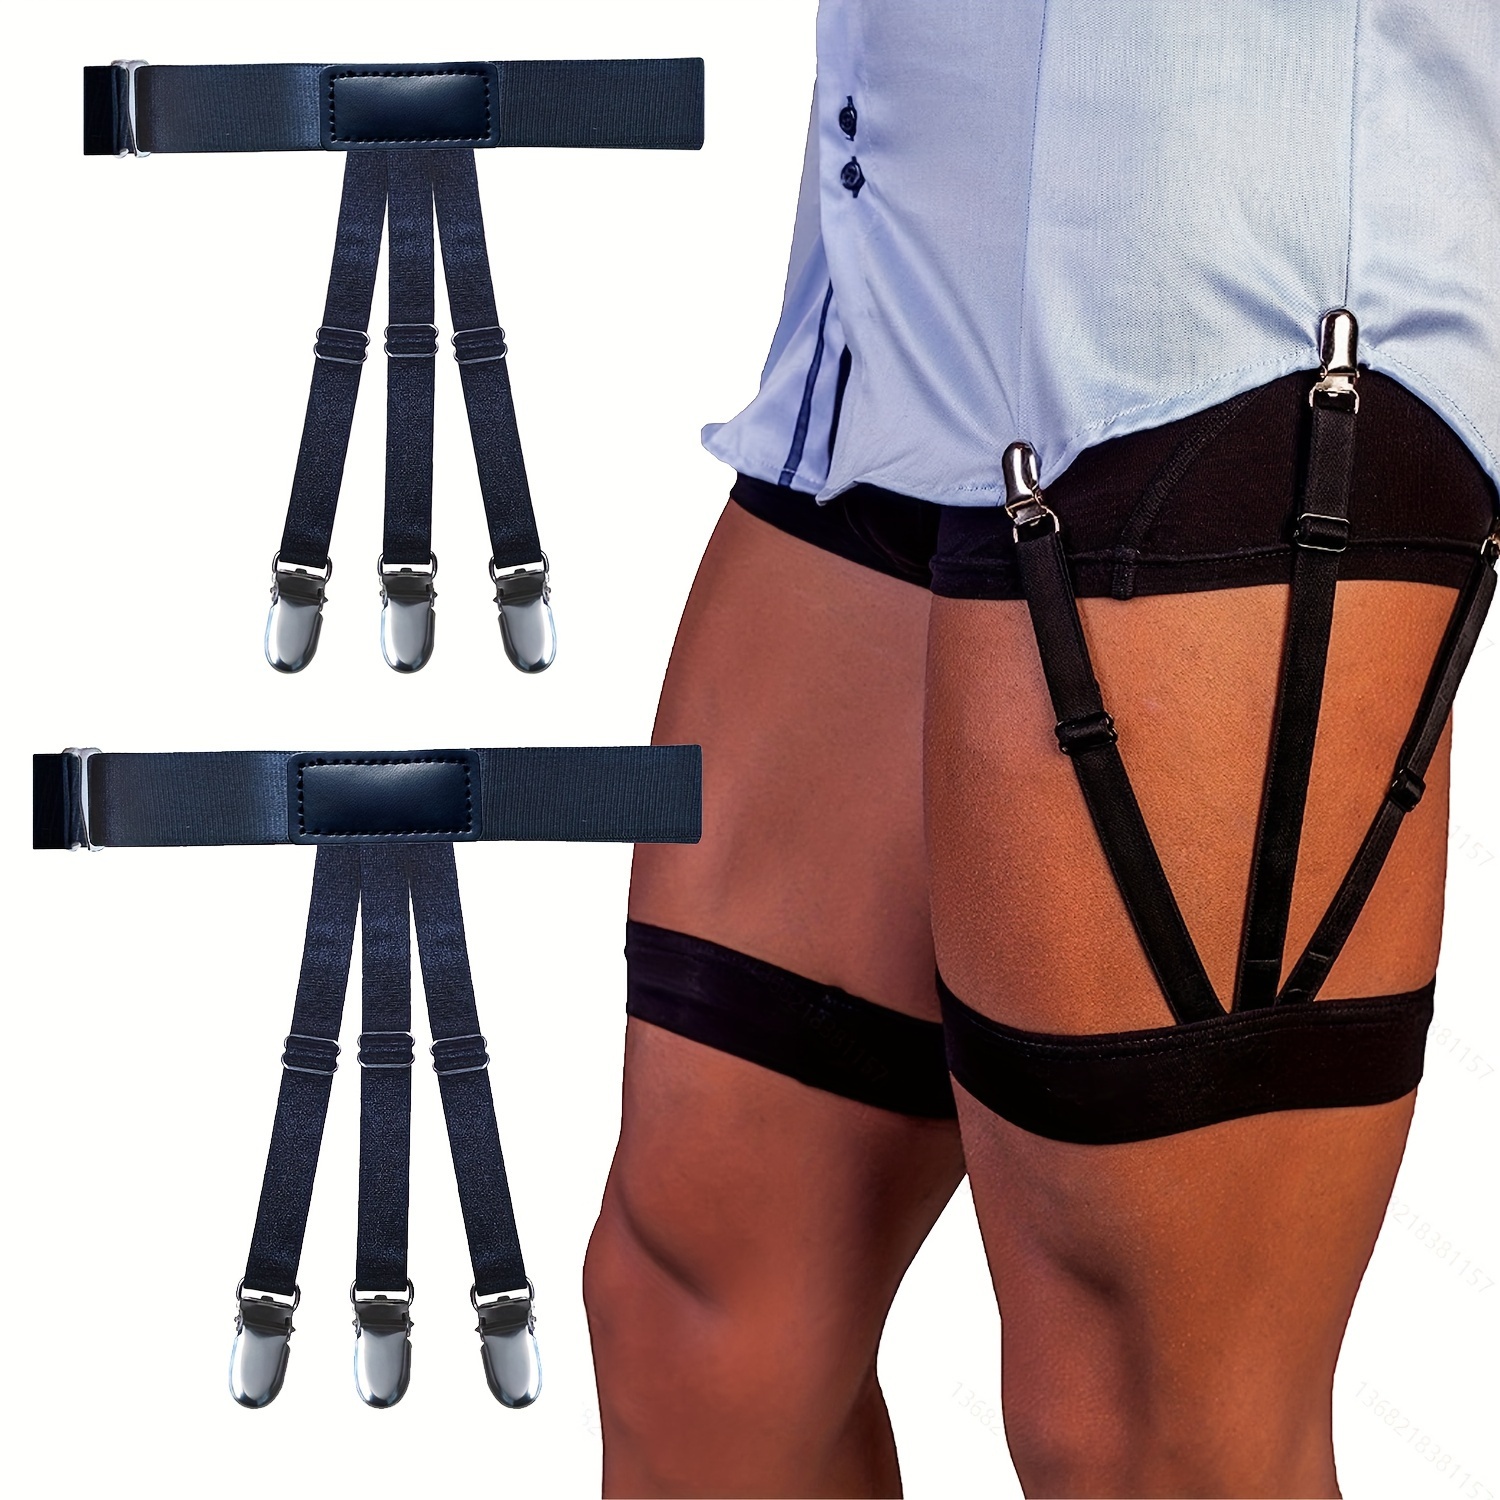 

2pcs/set Adjustable Shirt Holders Non-slip Locking Clamps For Men, Classic Accessories For Suit